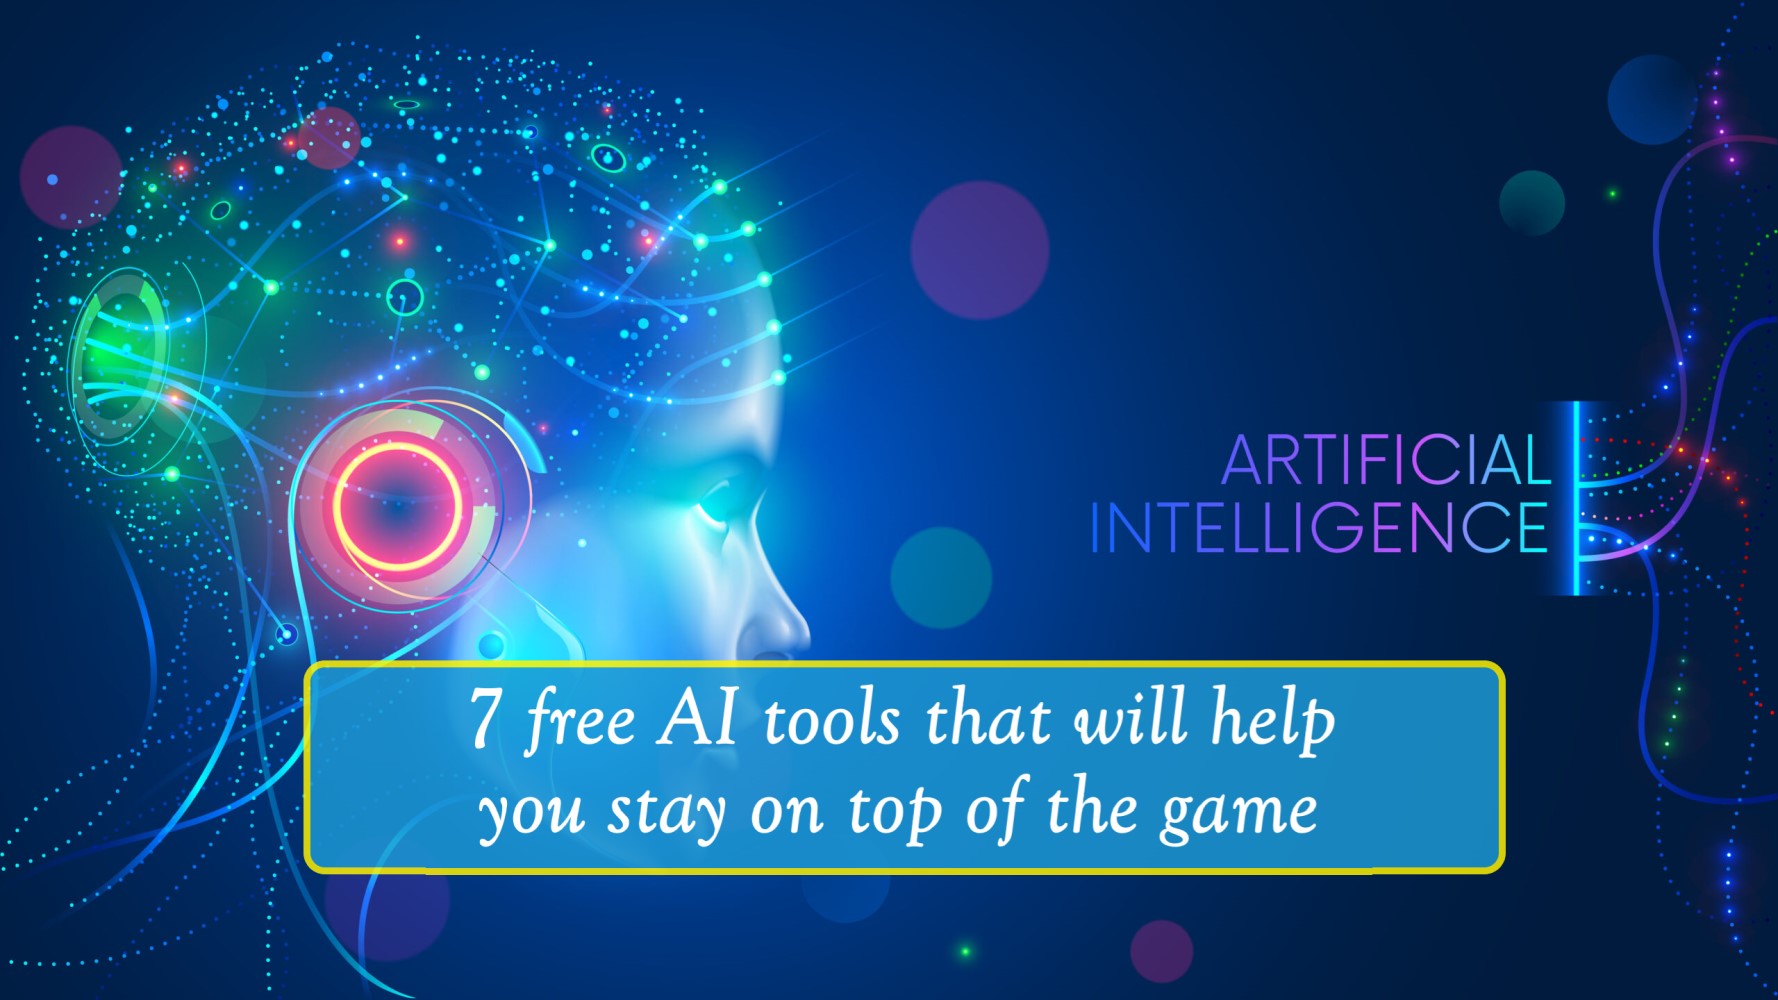 7 free AI tools that will help you stay on top of the game